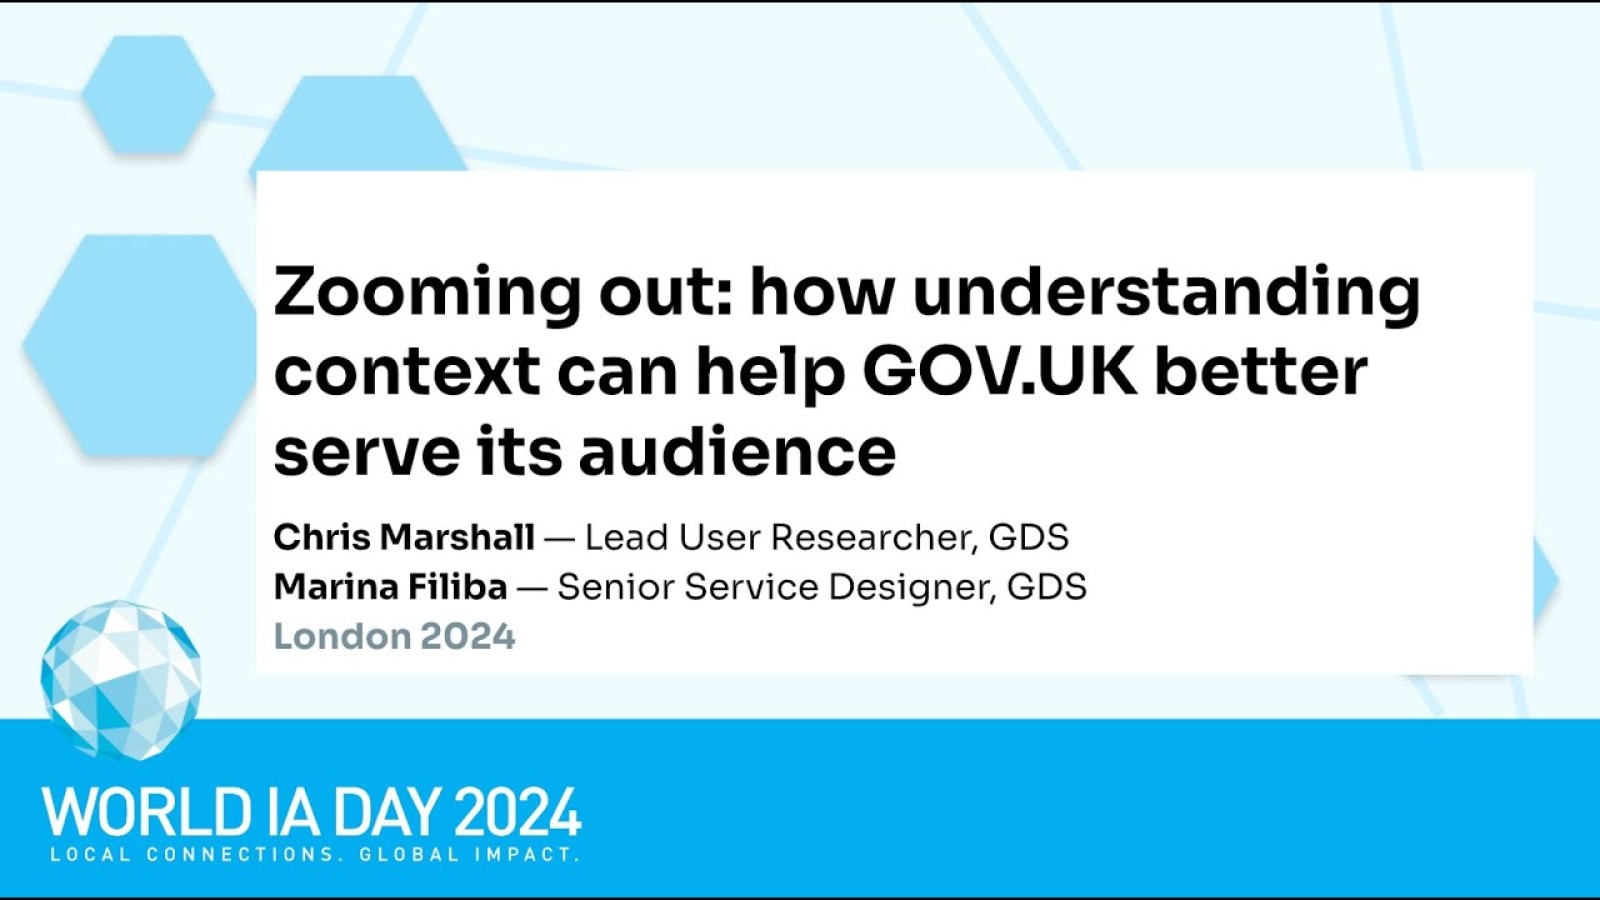  Zooming out: How understanding context can help GOV.UK better understand its audience with Chris Marshall and Marina Filiba